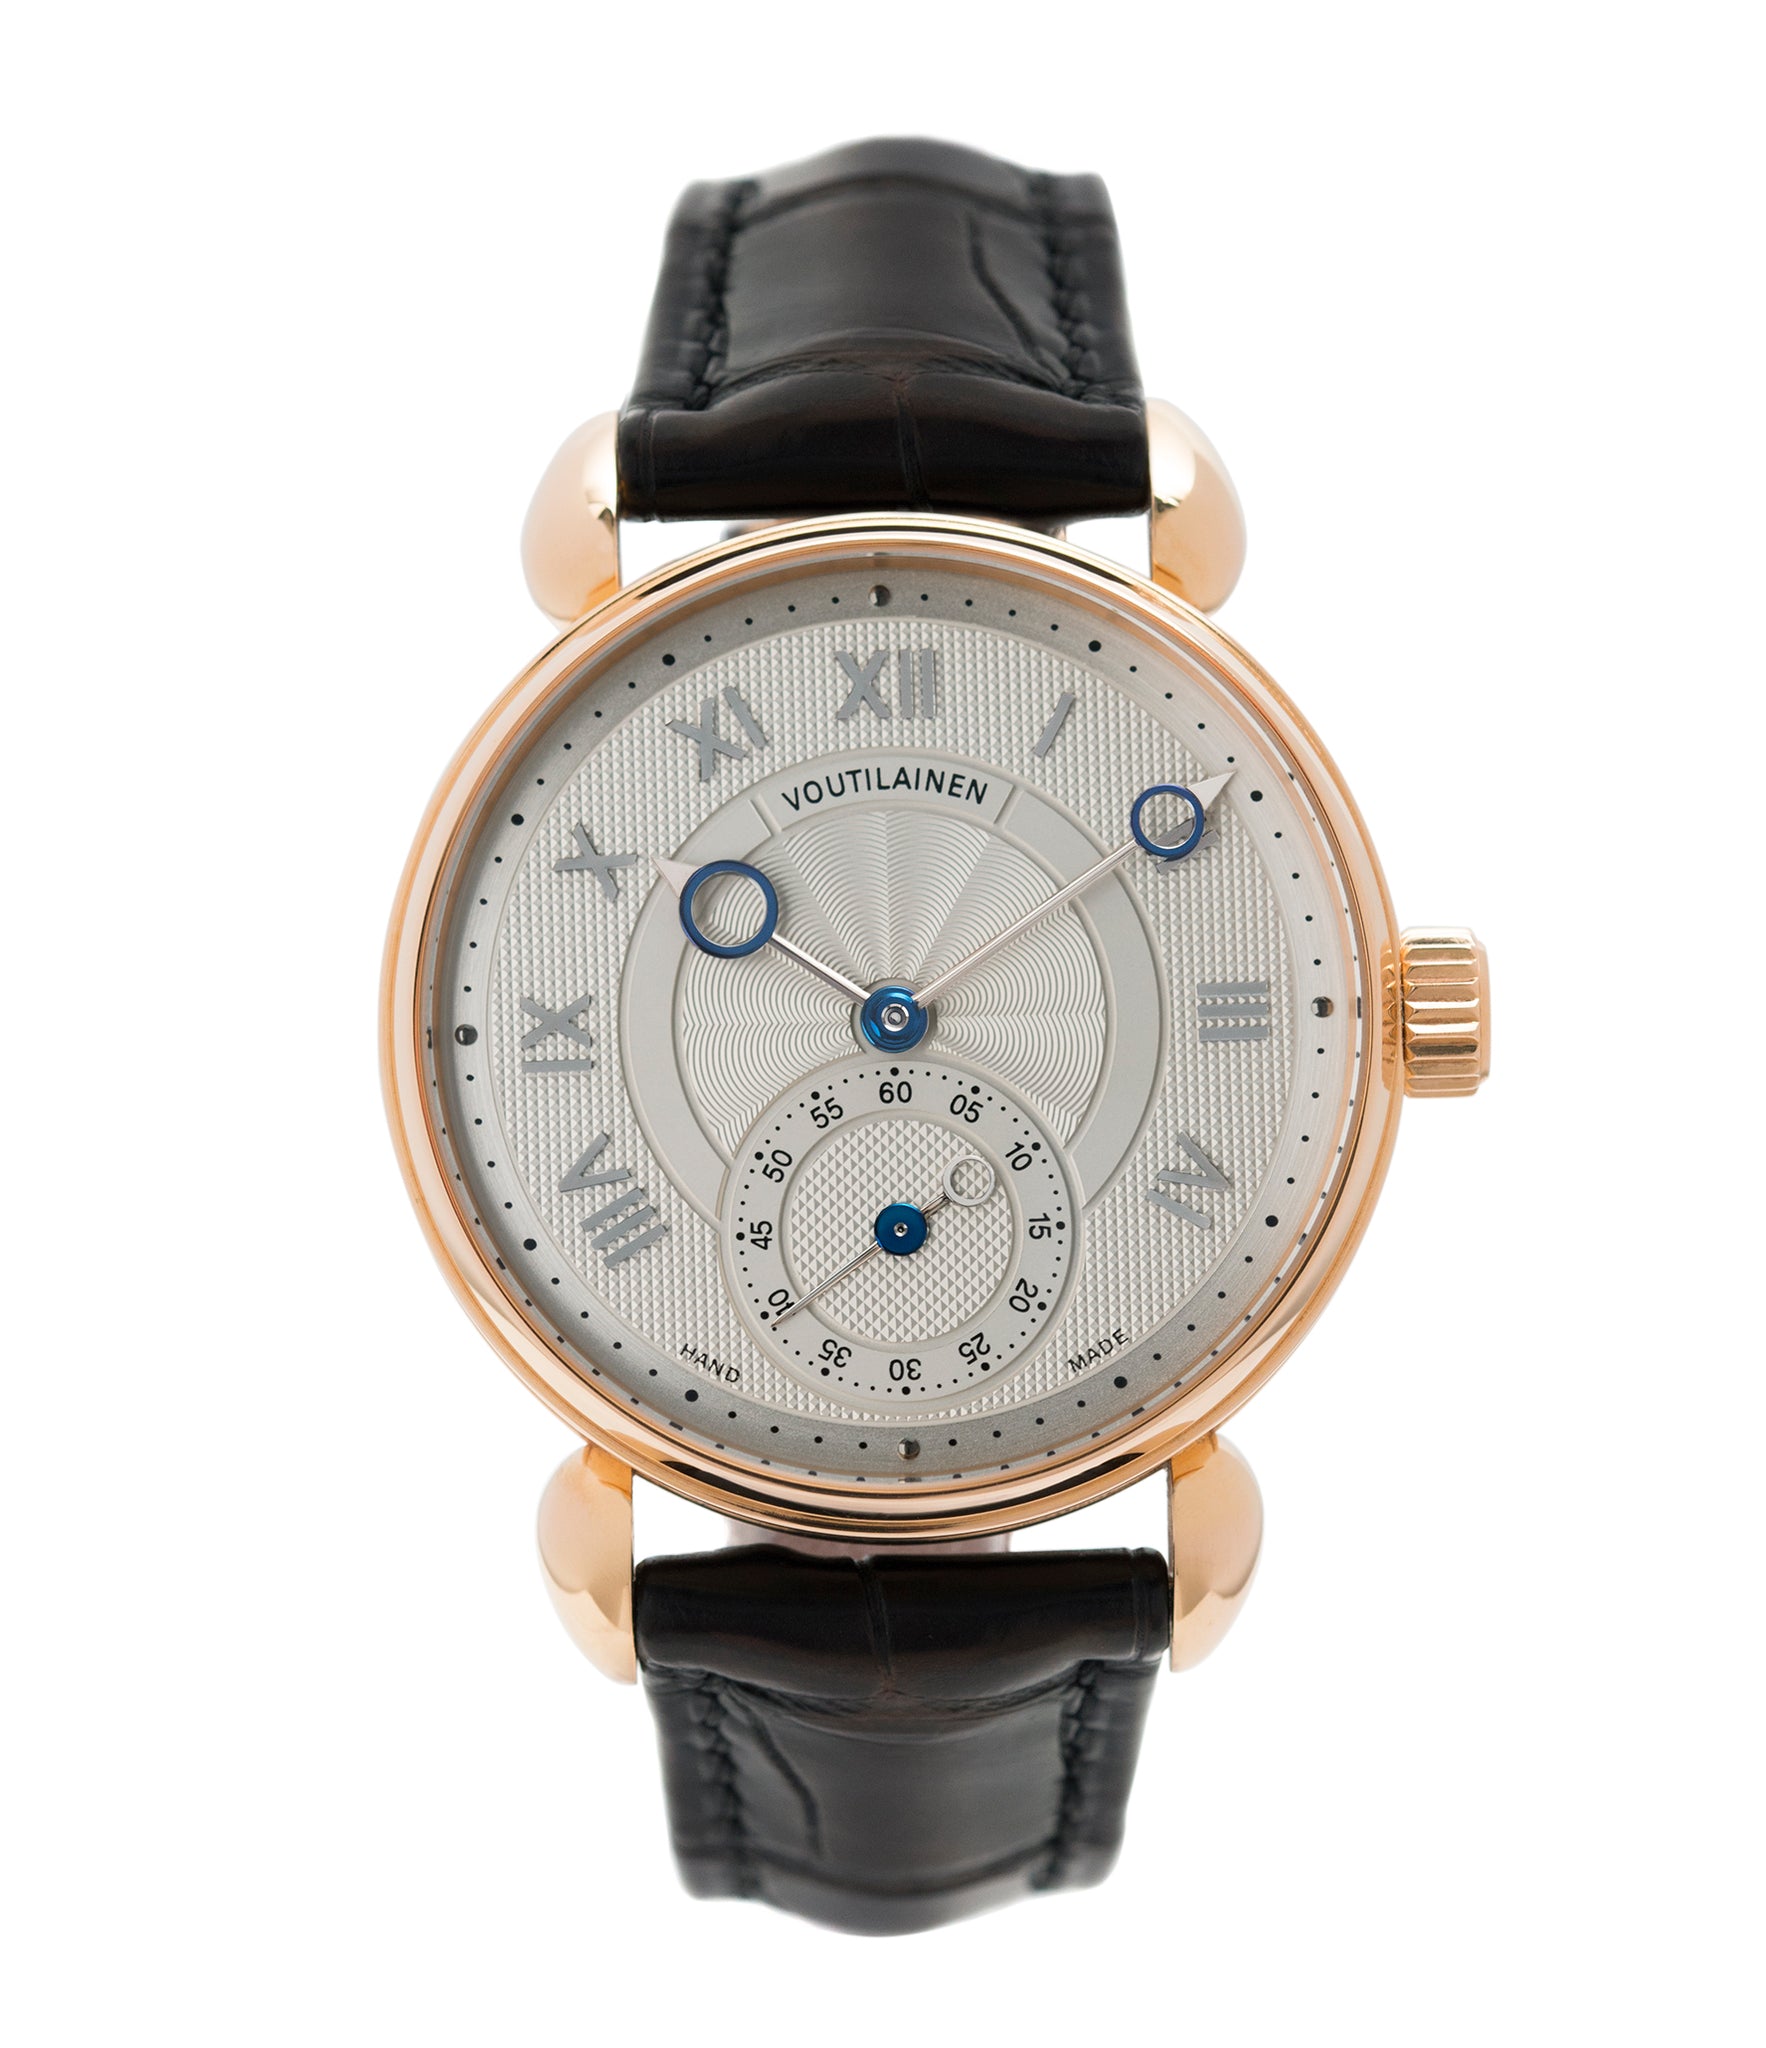 buy Kari Voutilainen Observatoire Limited Edition rose gold rare dress watch for sale online at A Collected Man London endorsed seller of independent watchmaker